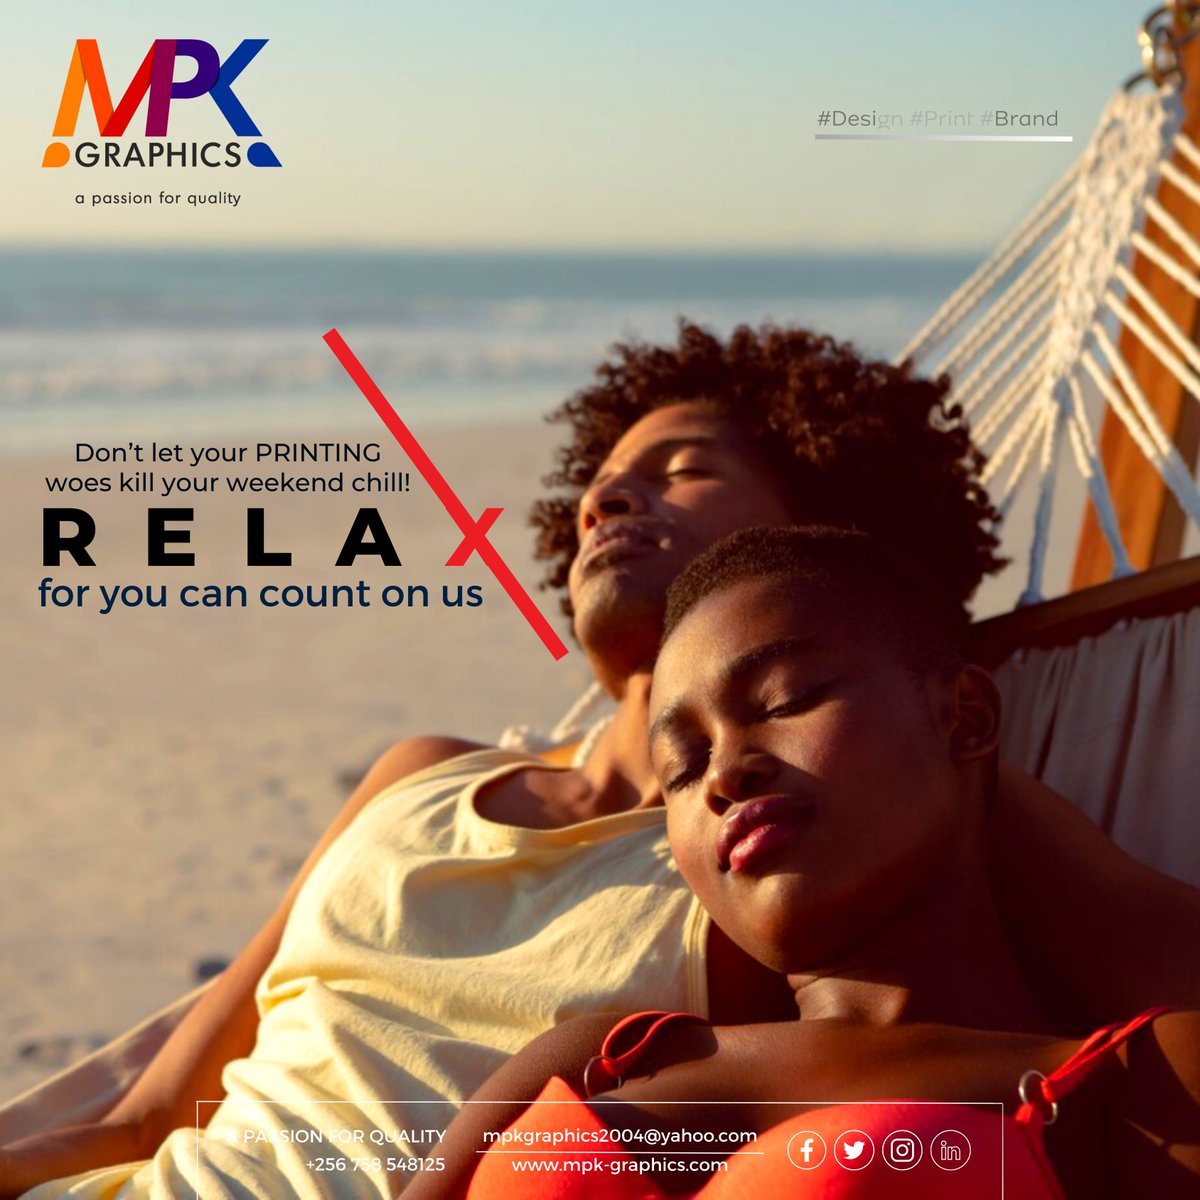 Printing woes should be the least of your worries this weekend! Relax! You can count on us this #weekend because we are open. For more info, visit mpk-graphics.com